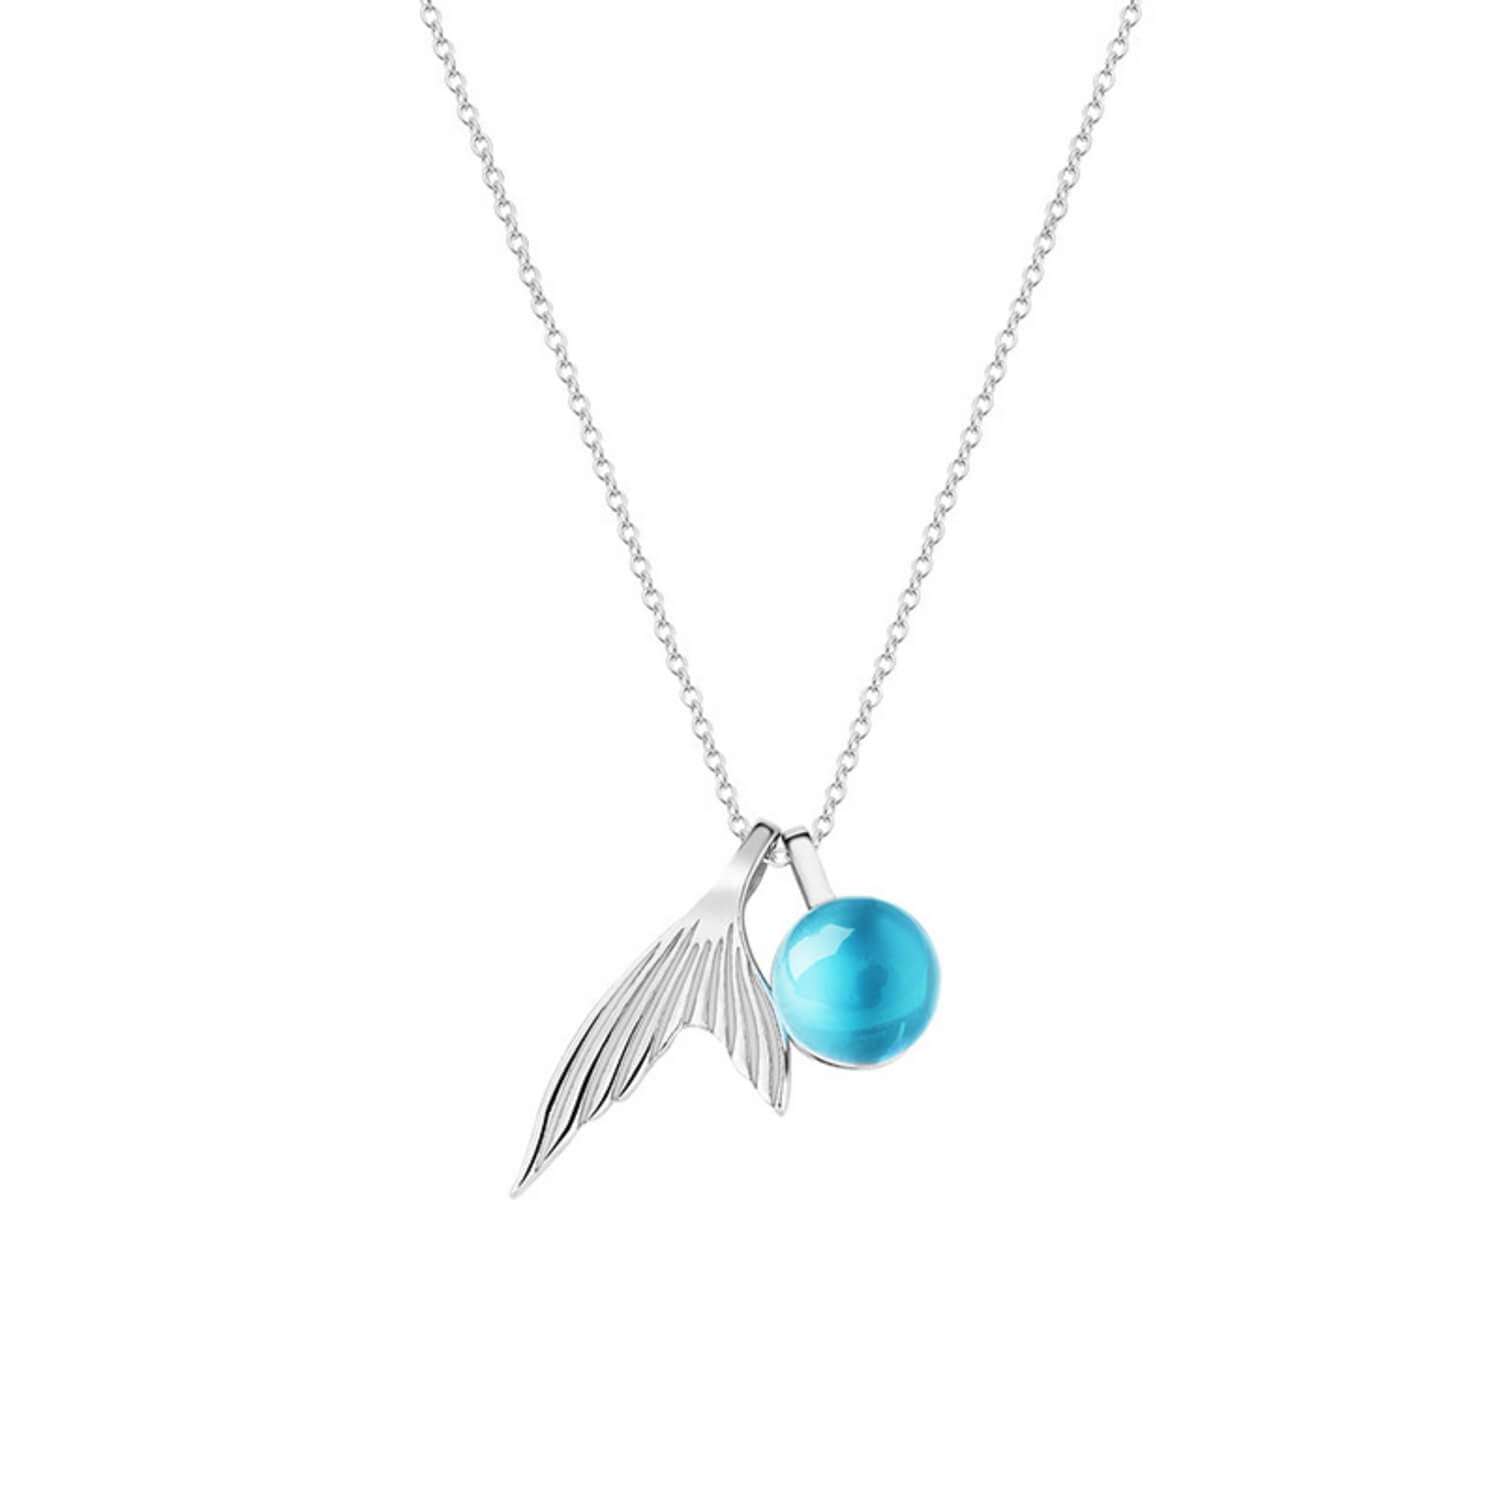 tail and crystal tear ball necklace for women